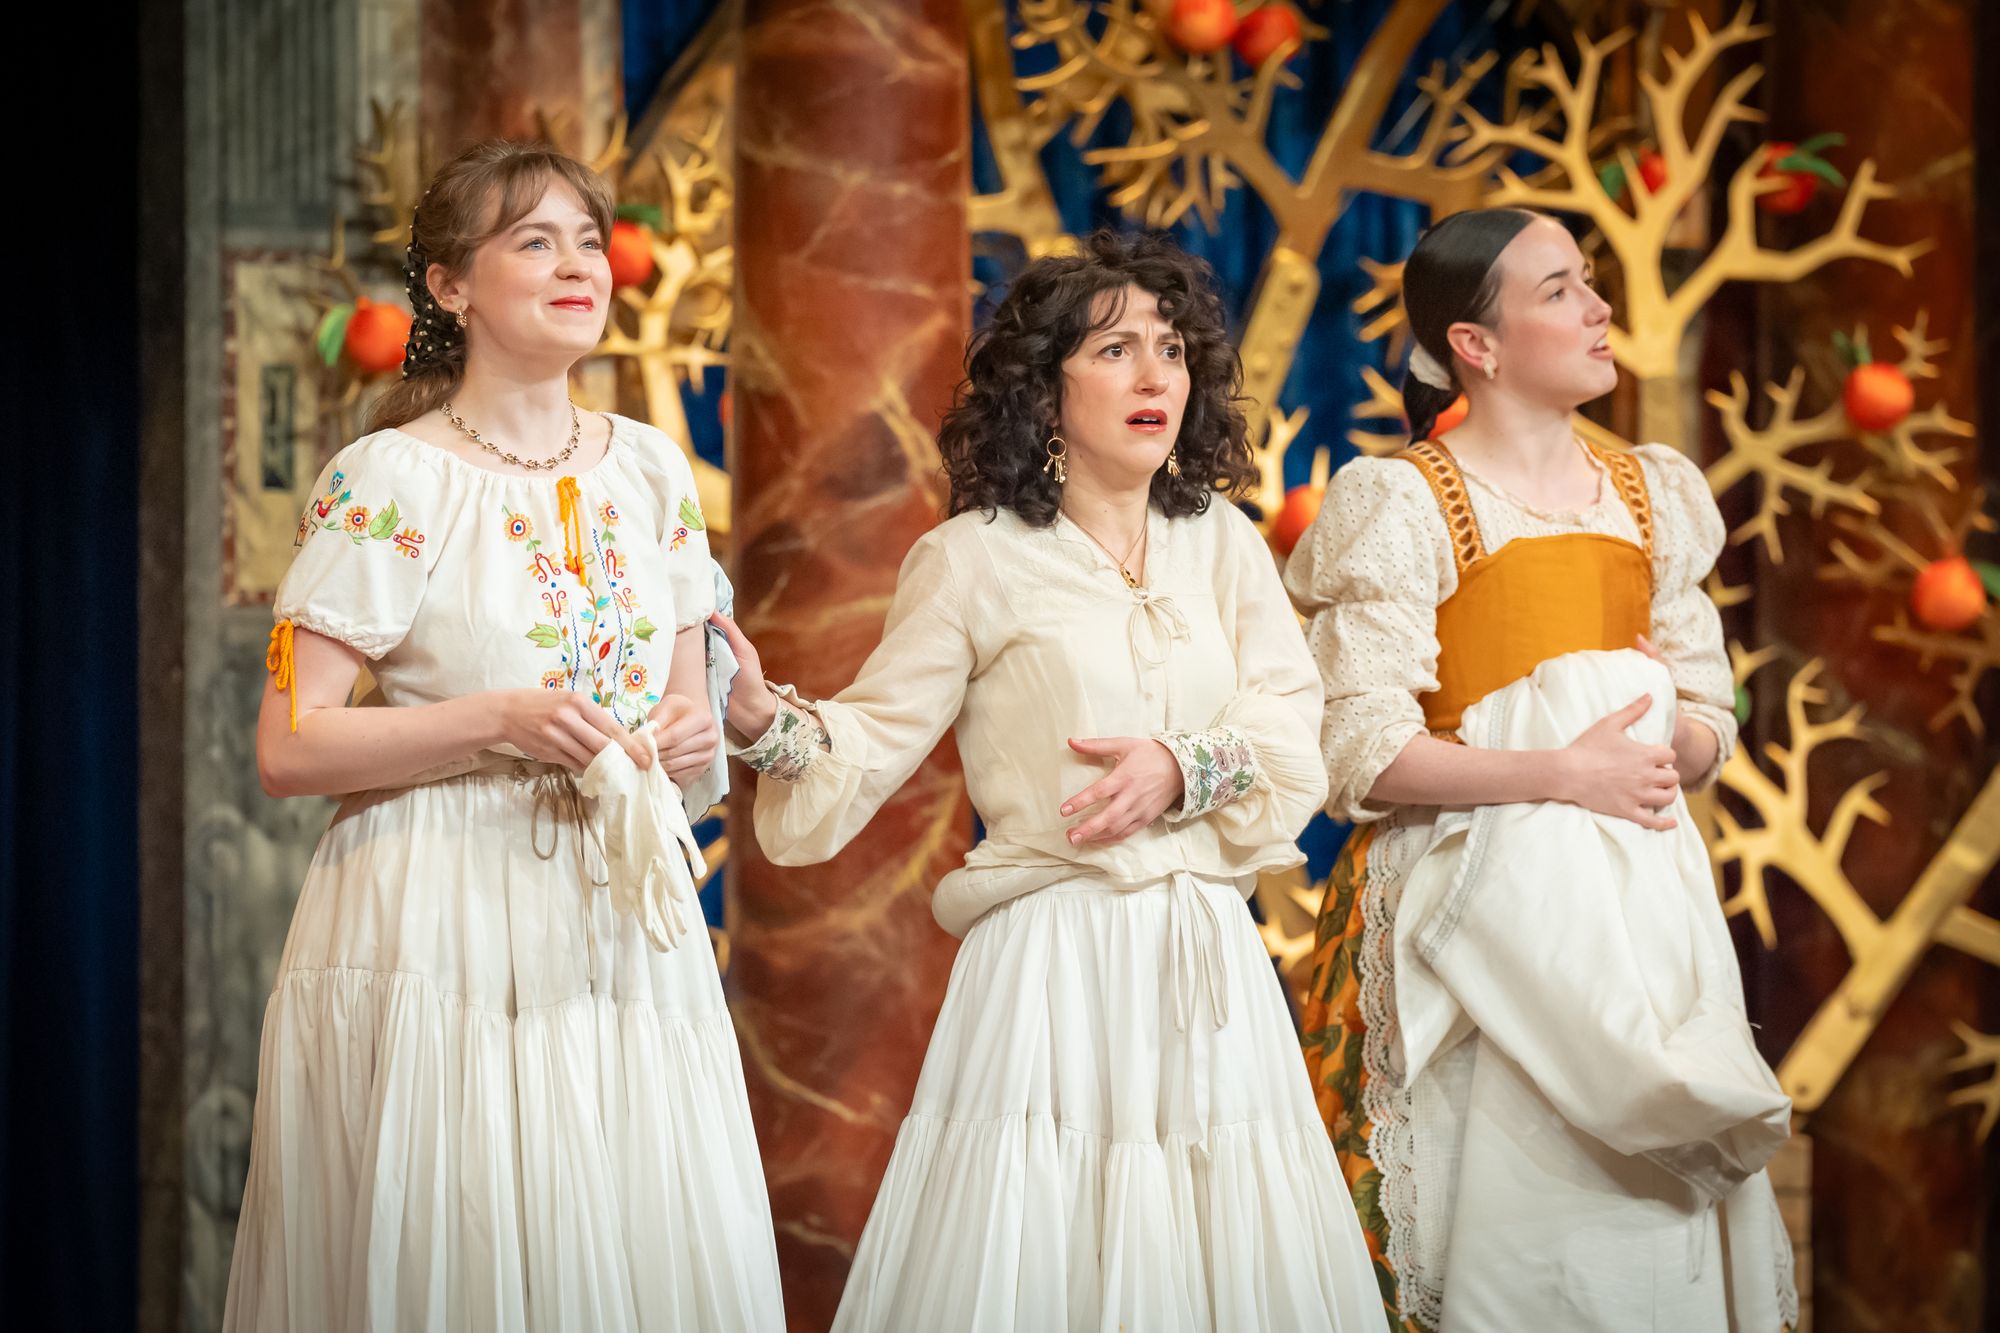 much ado about nothing at shakespeare’s globe review: this sunkissed production is joyful and intelligent